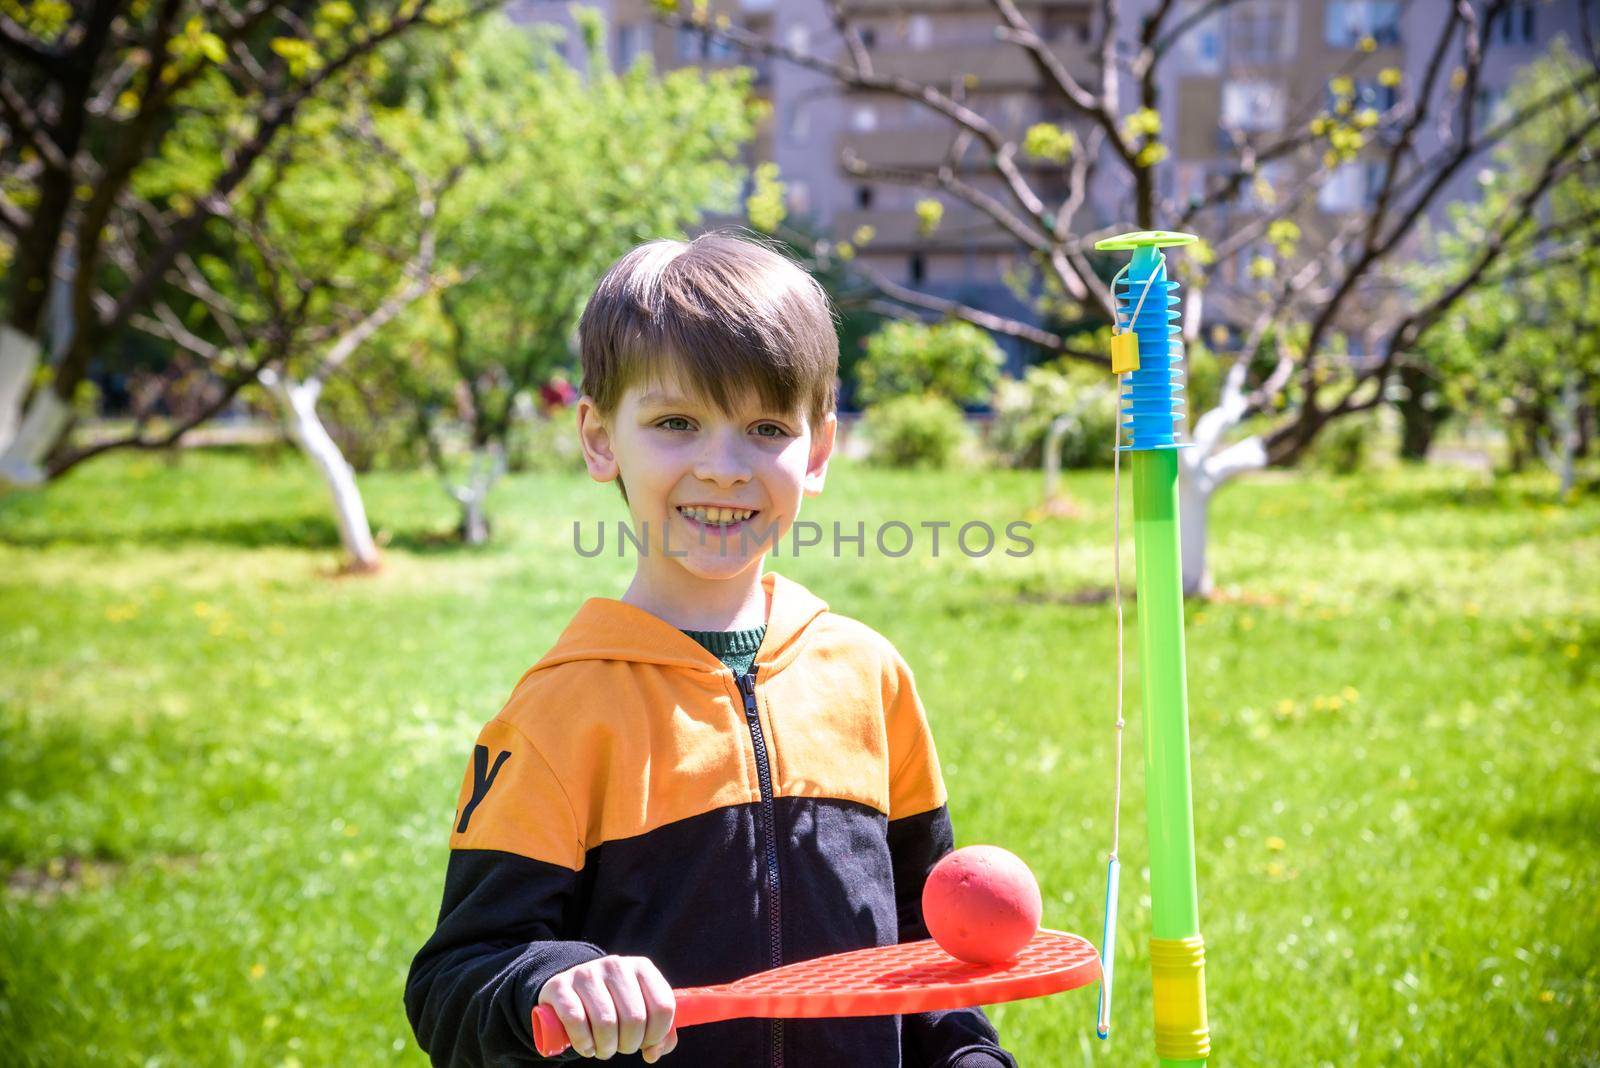 Happy boy is playing tetherball swing ball game in summer camping. Happy leisure healthy active time outdoors concept.